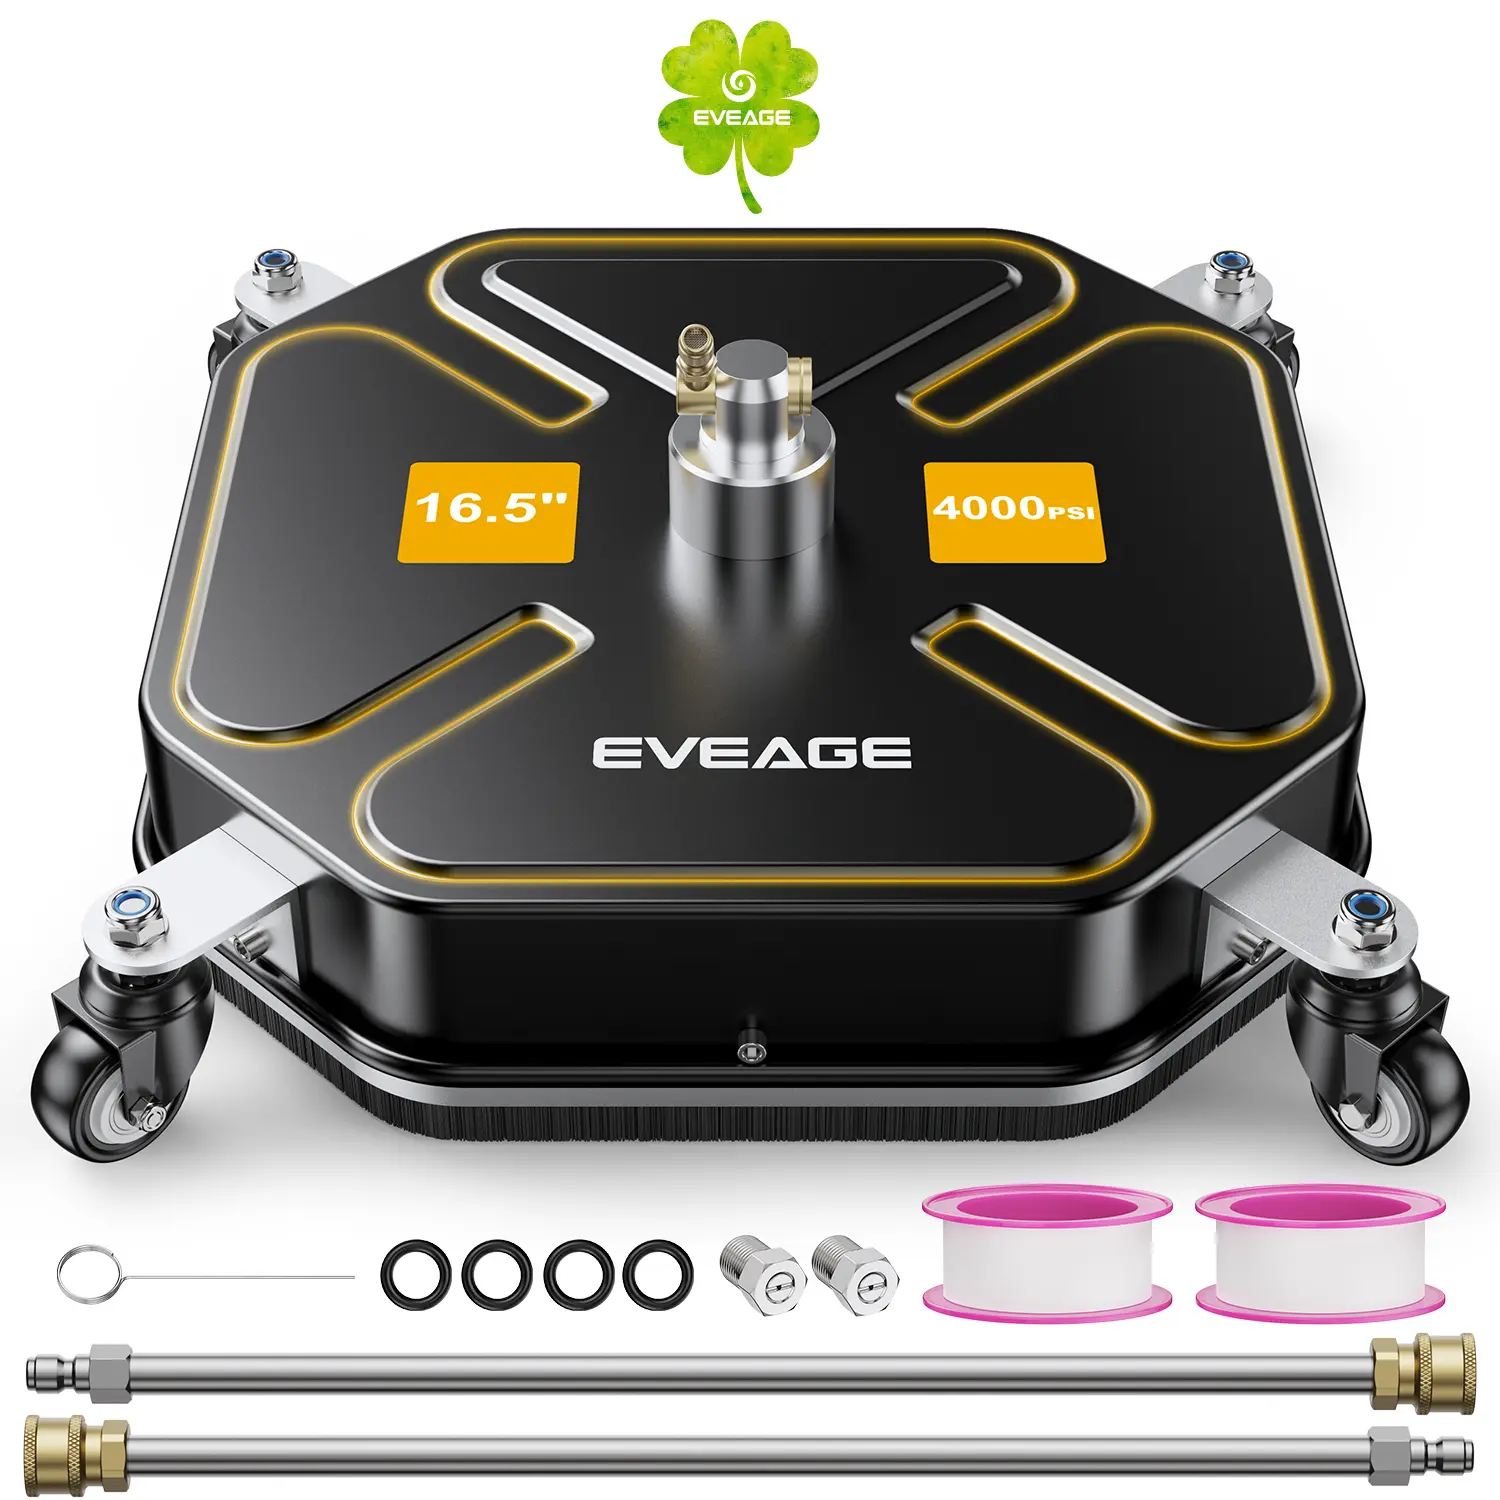 EVEAGE Eight-faceted pressure washer surface cleaner